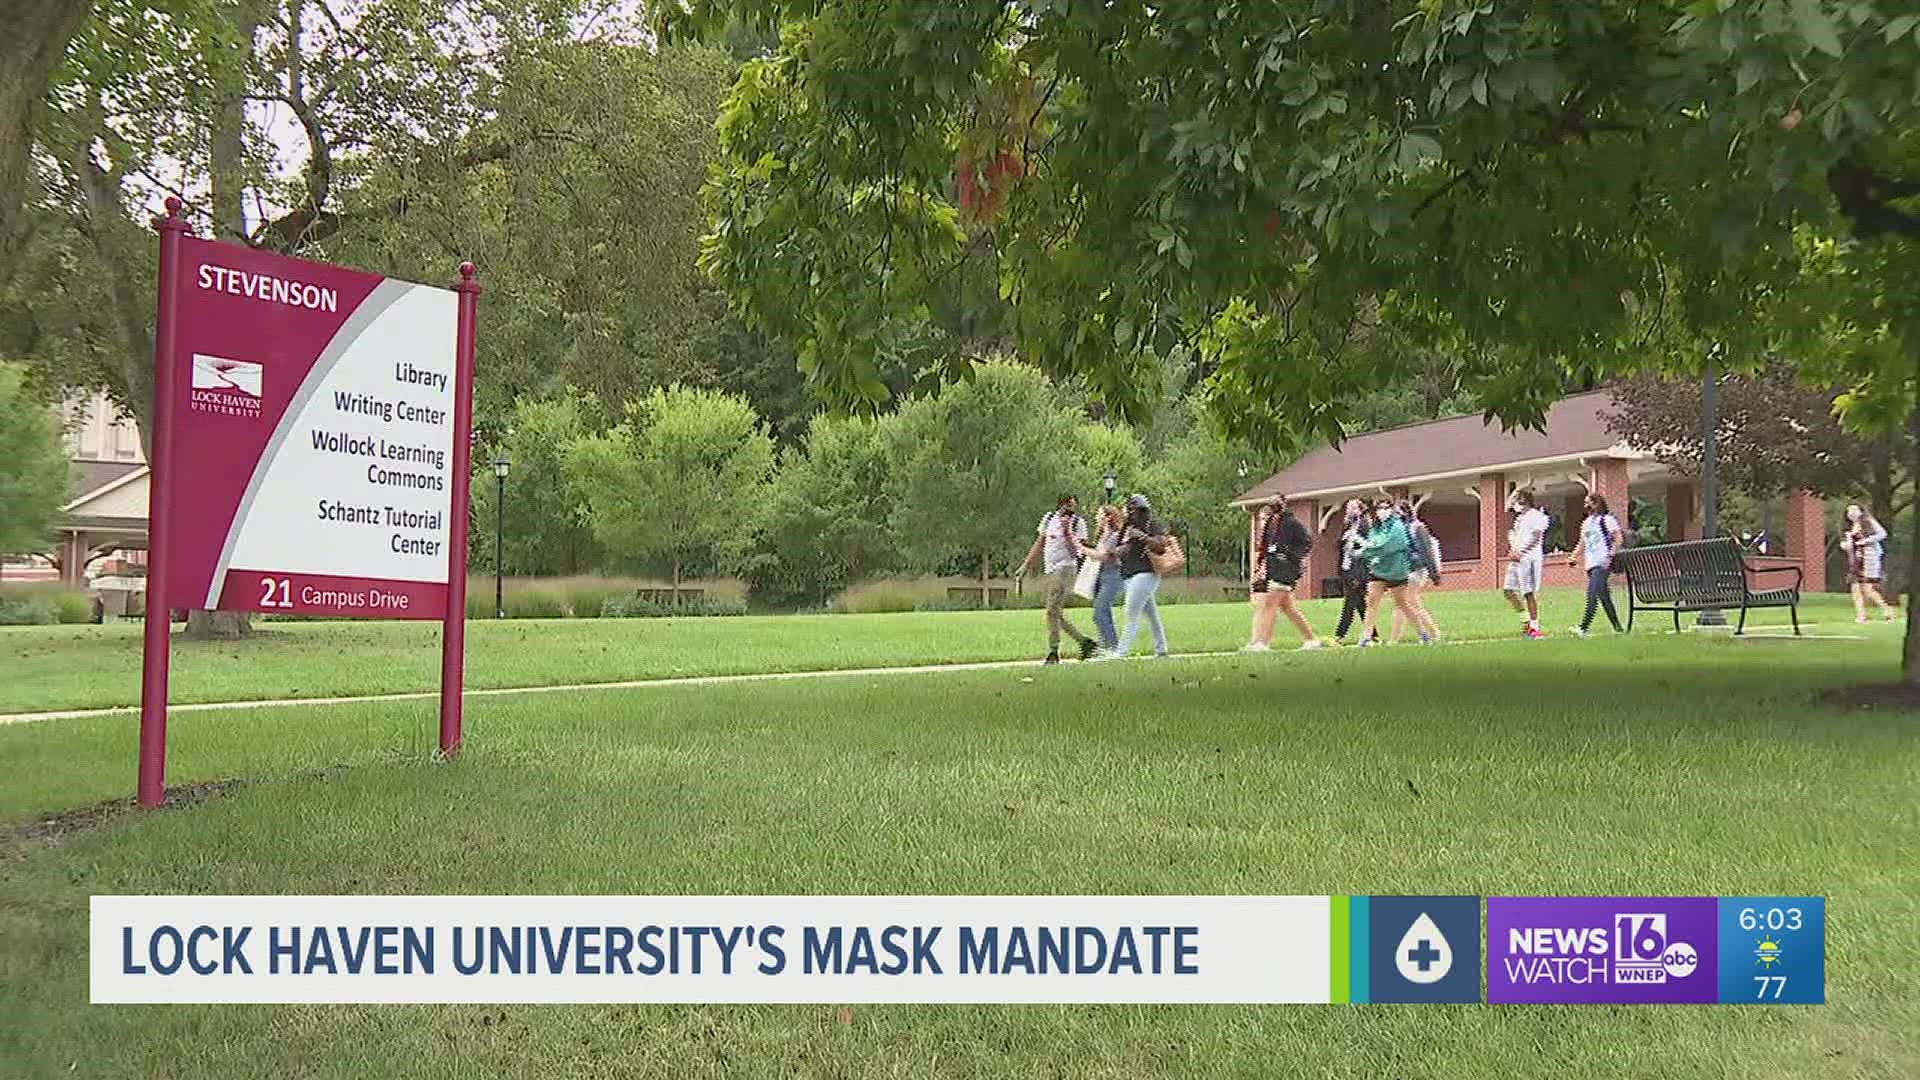 The university follows the lead of other universities in Pennsylvania requiring students to wear masks inside any university building.